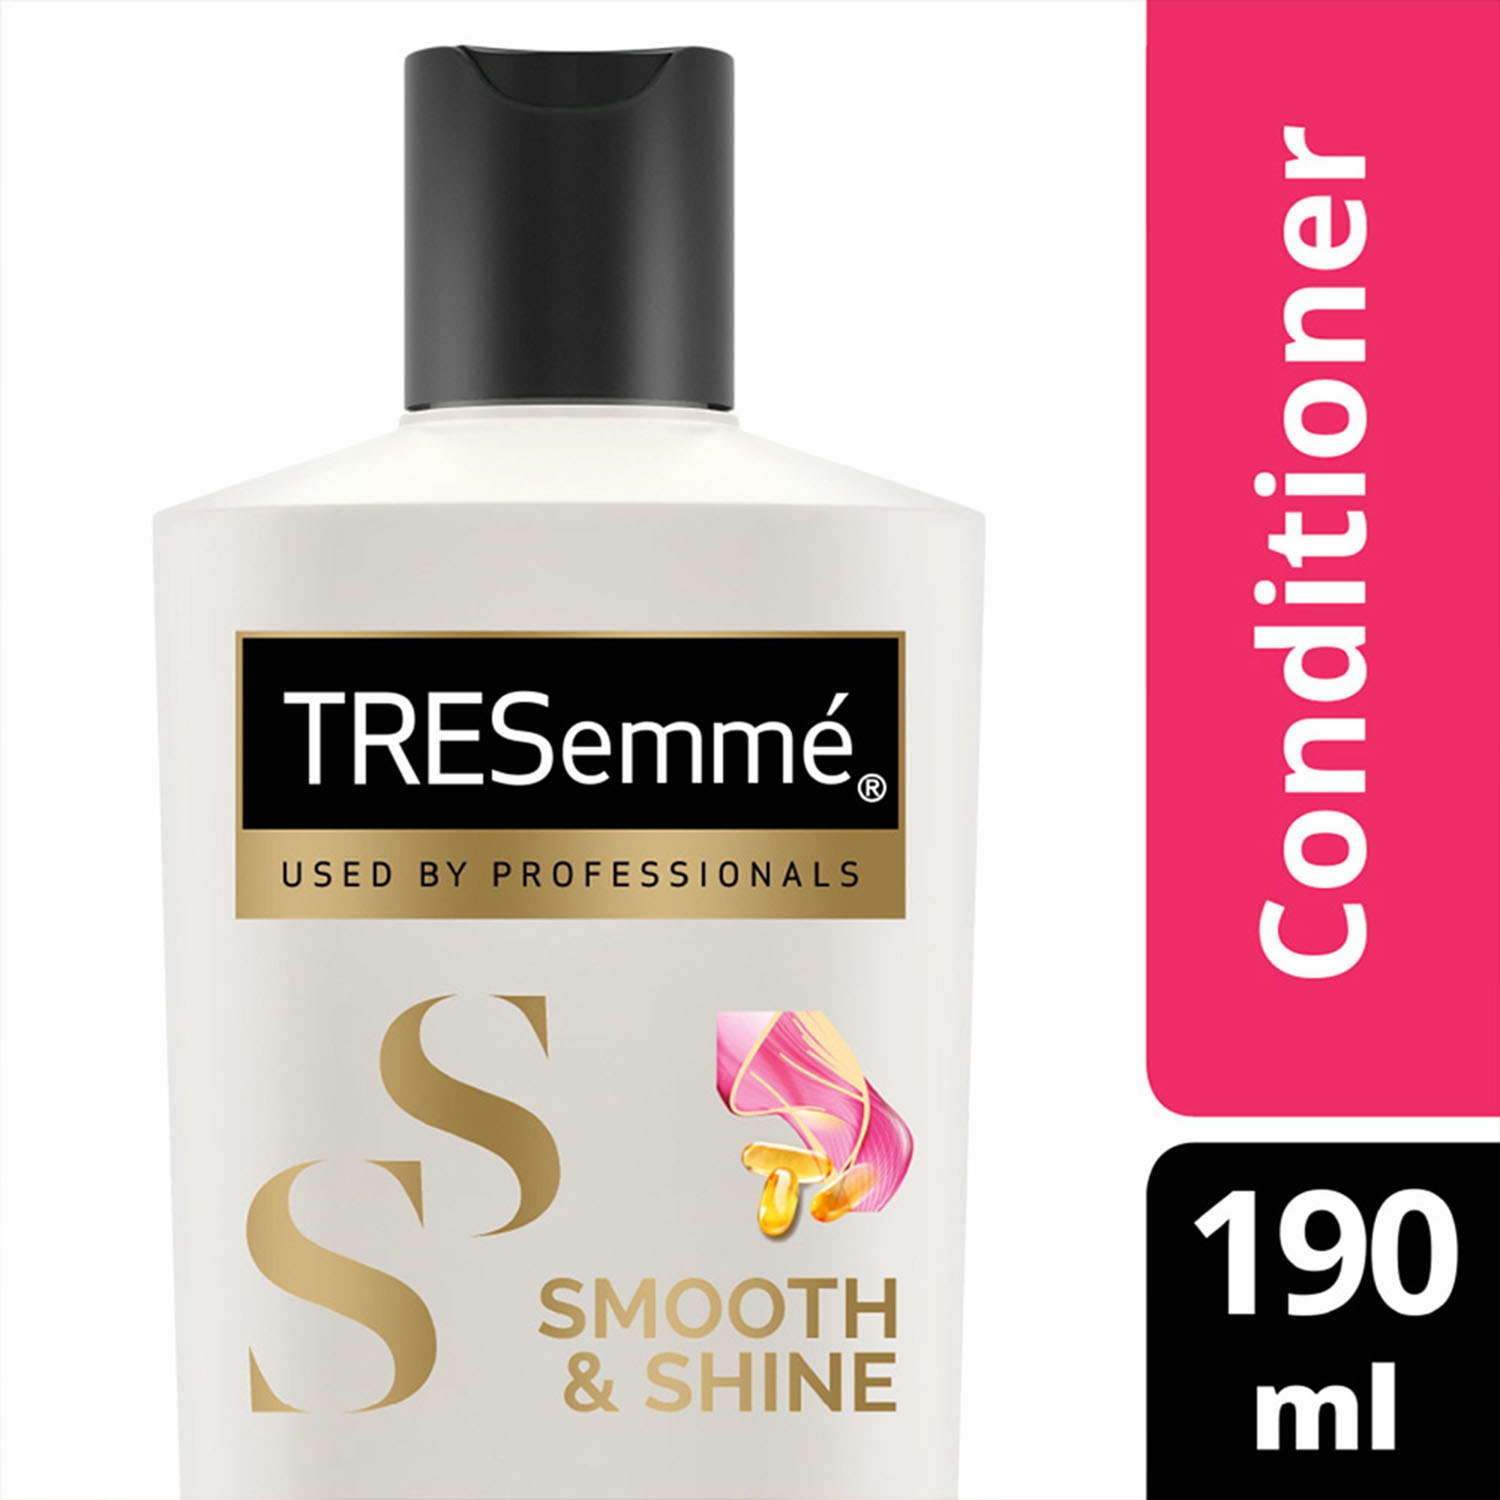 Tresemme | Tresemme Smooth & Shine Conditioner - (190ml)